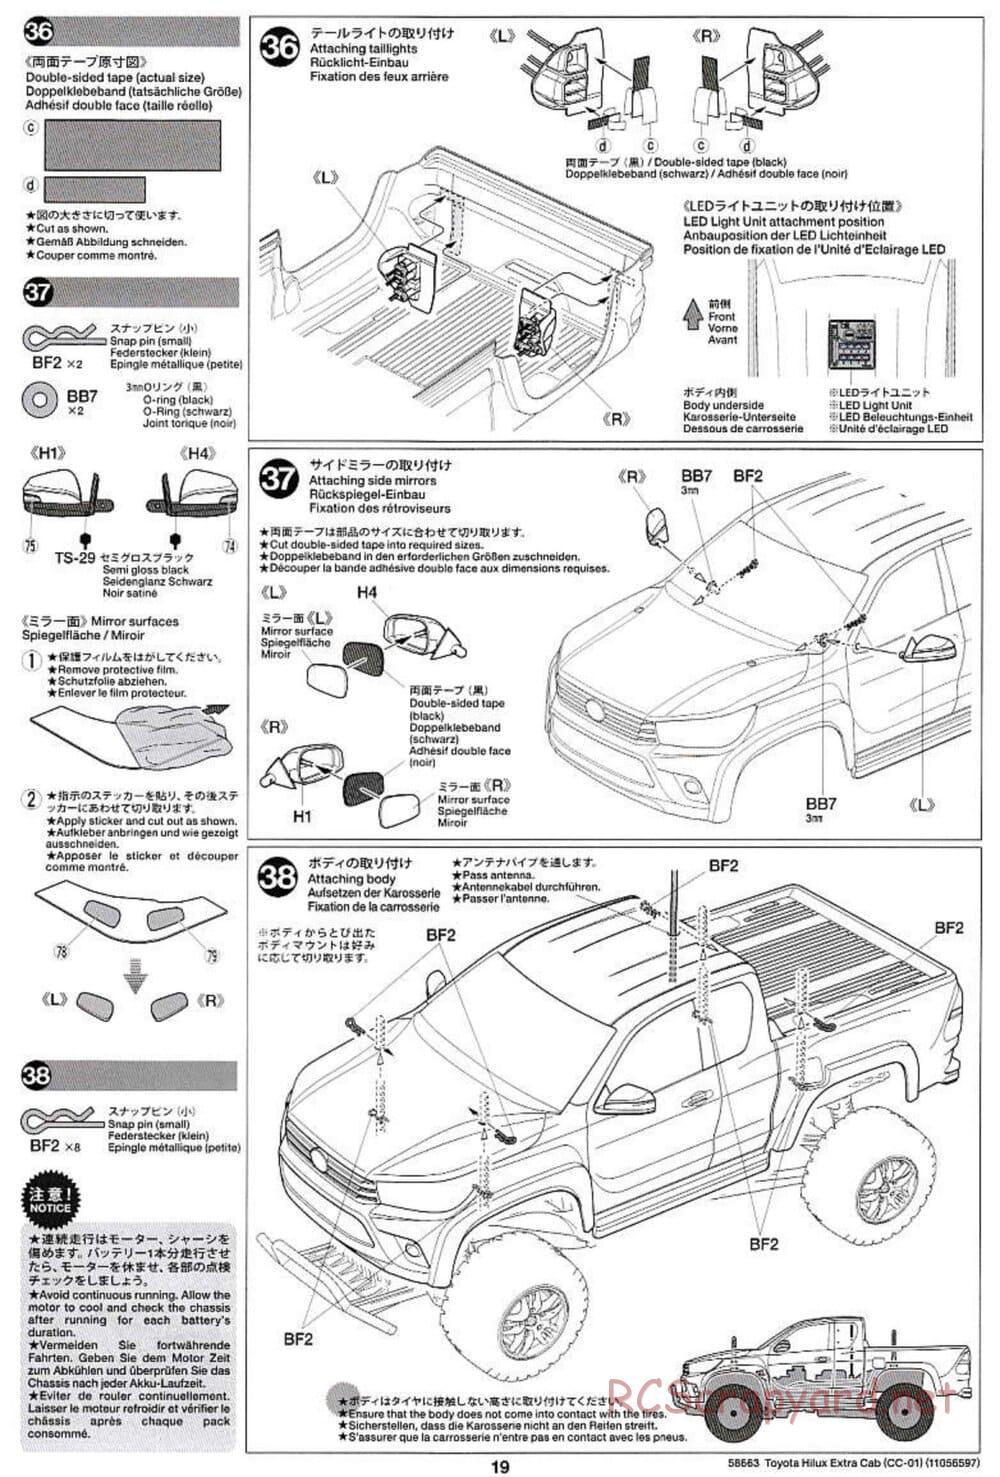 Tamiya - Toyota Hilux Extra Cab - CC-01 Chassis - Manual - Page 19